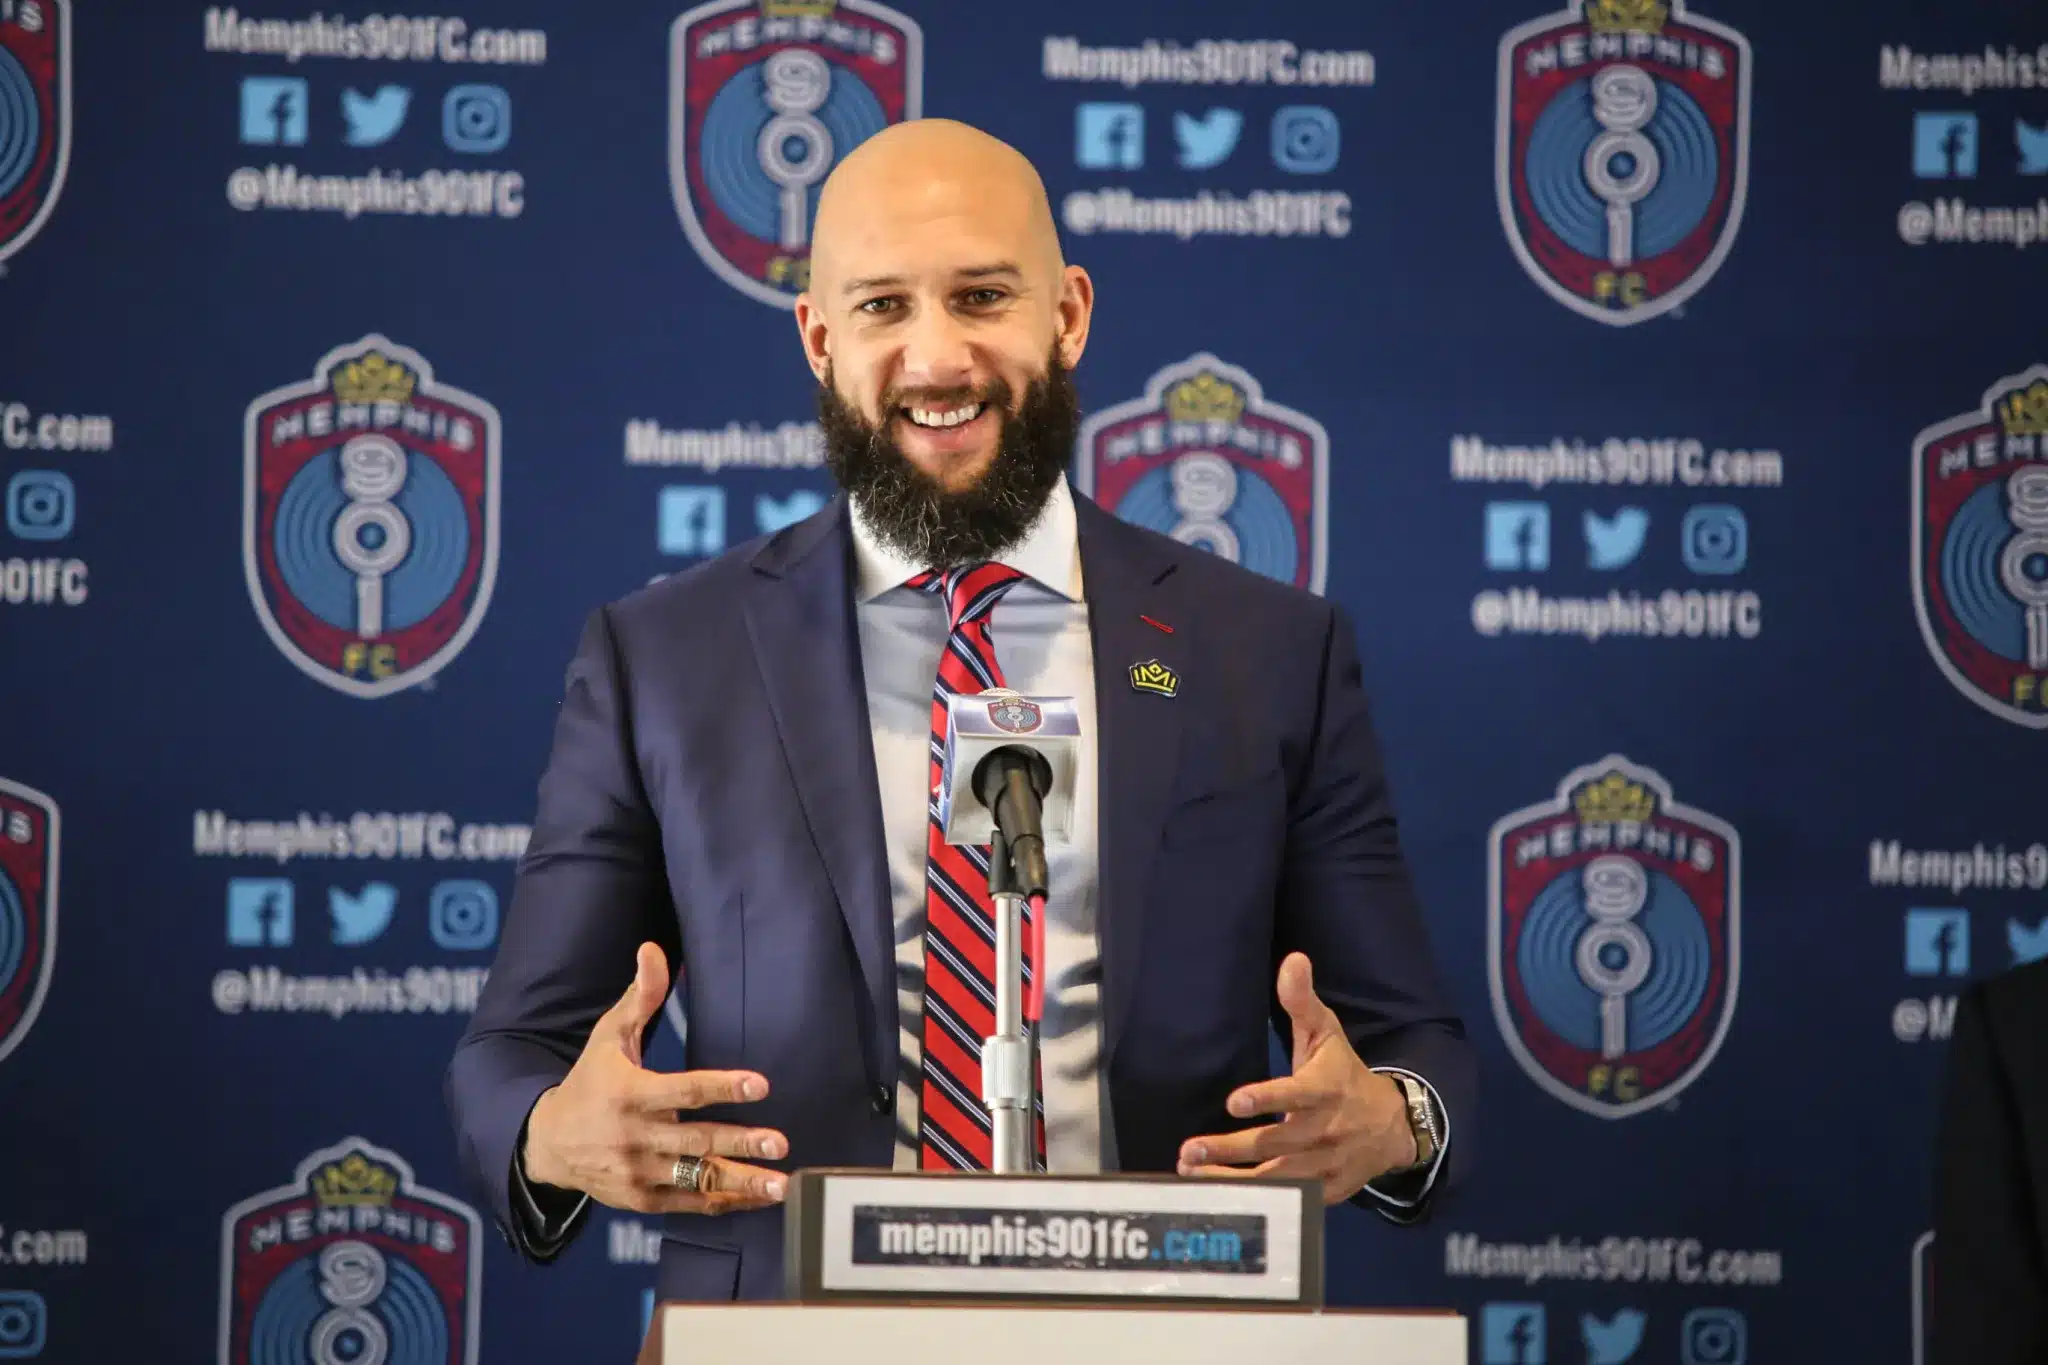 Featured image for “Breaking News: Tim Howard Steps Down As Sporting Director Of Memphis 901 FC”